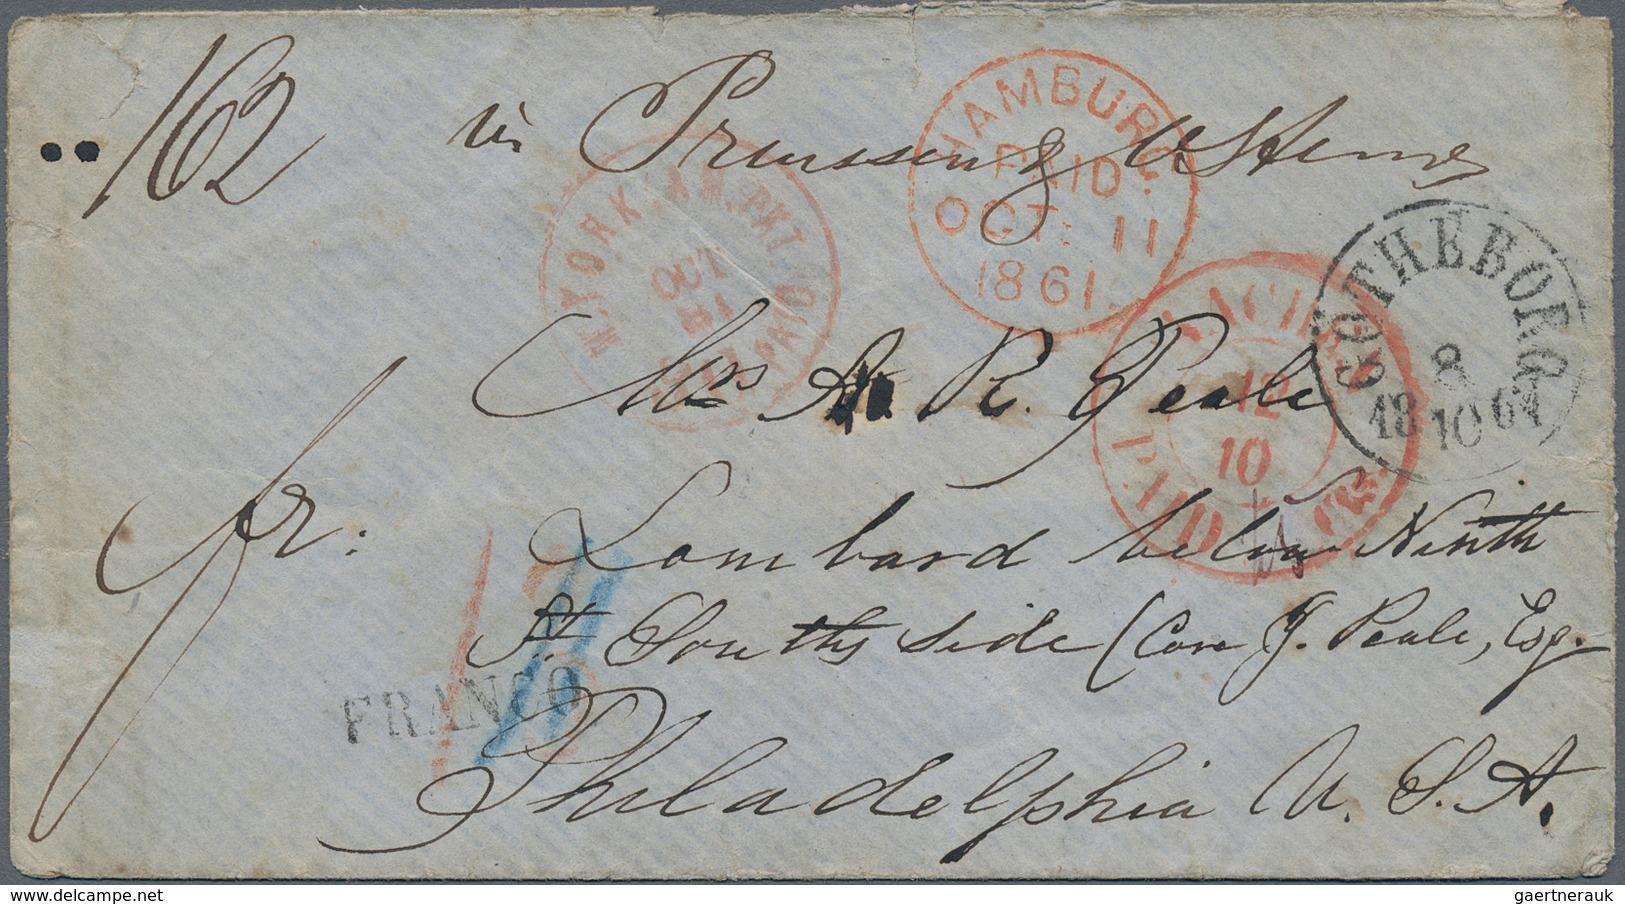 Schweden: 1840's-1930's ca.: About 60 letters, covers, picture postcards and postal stationery items